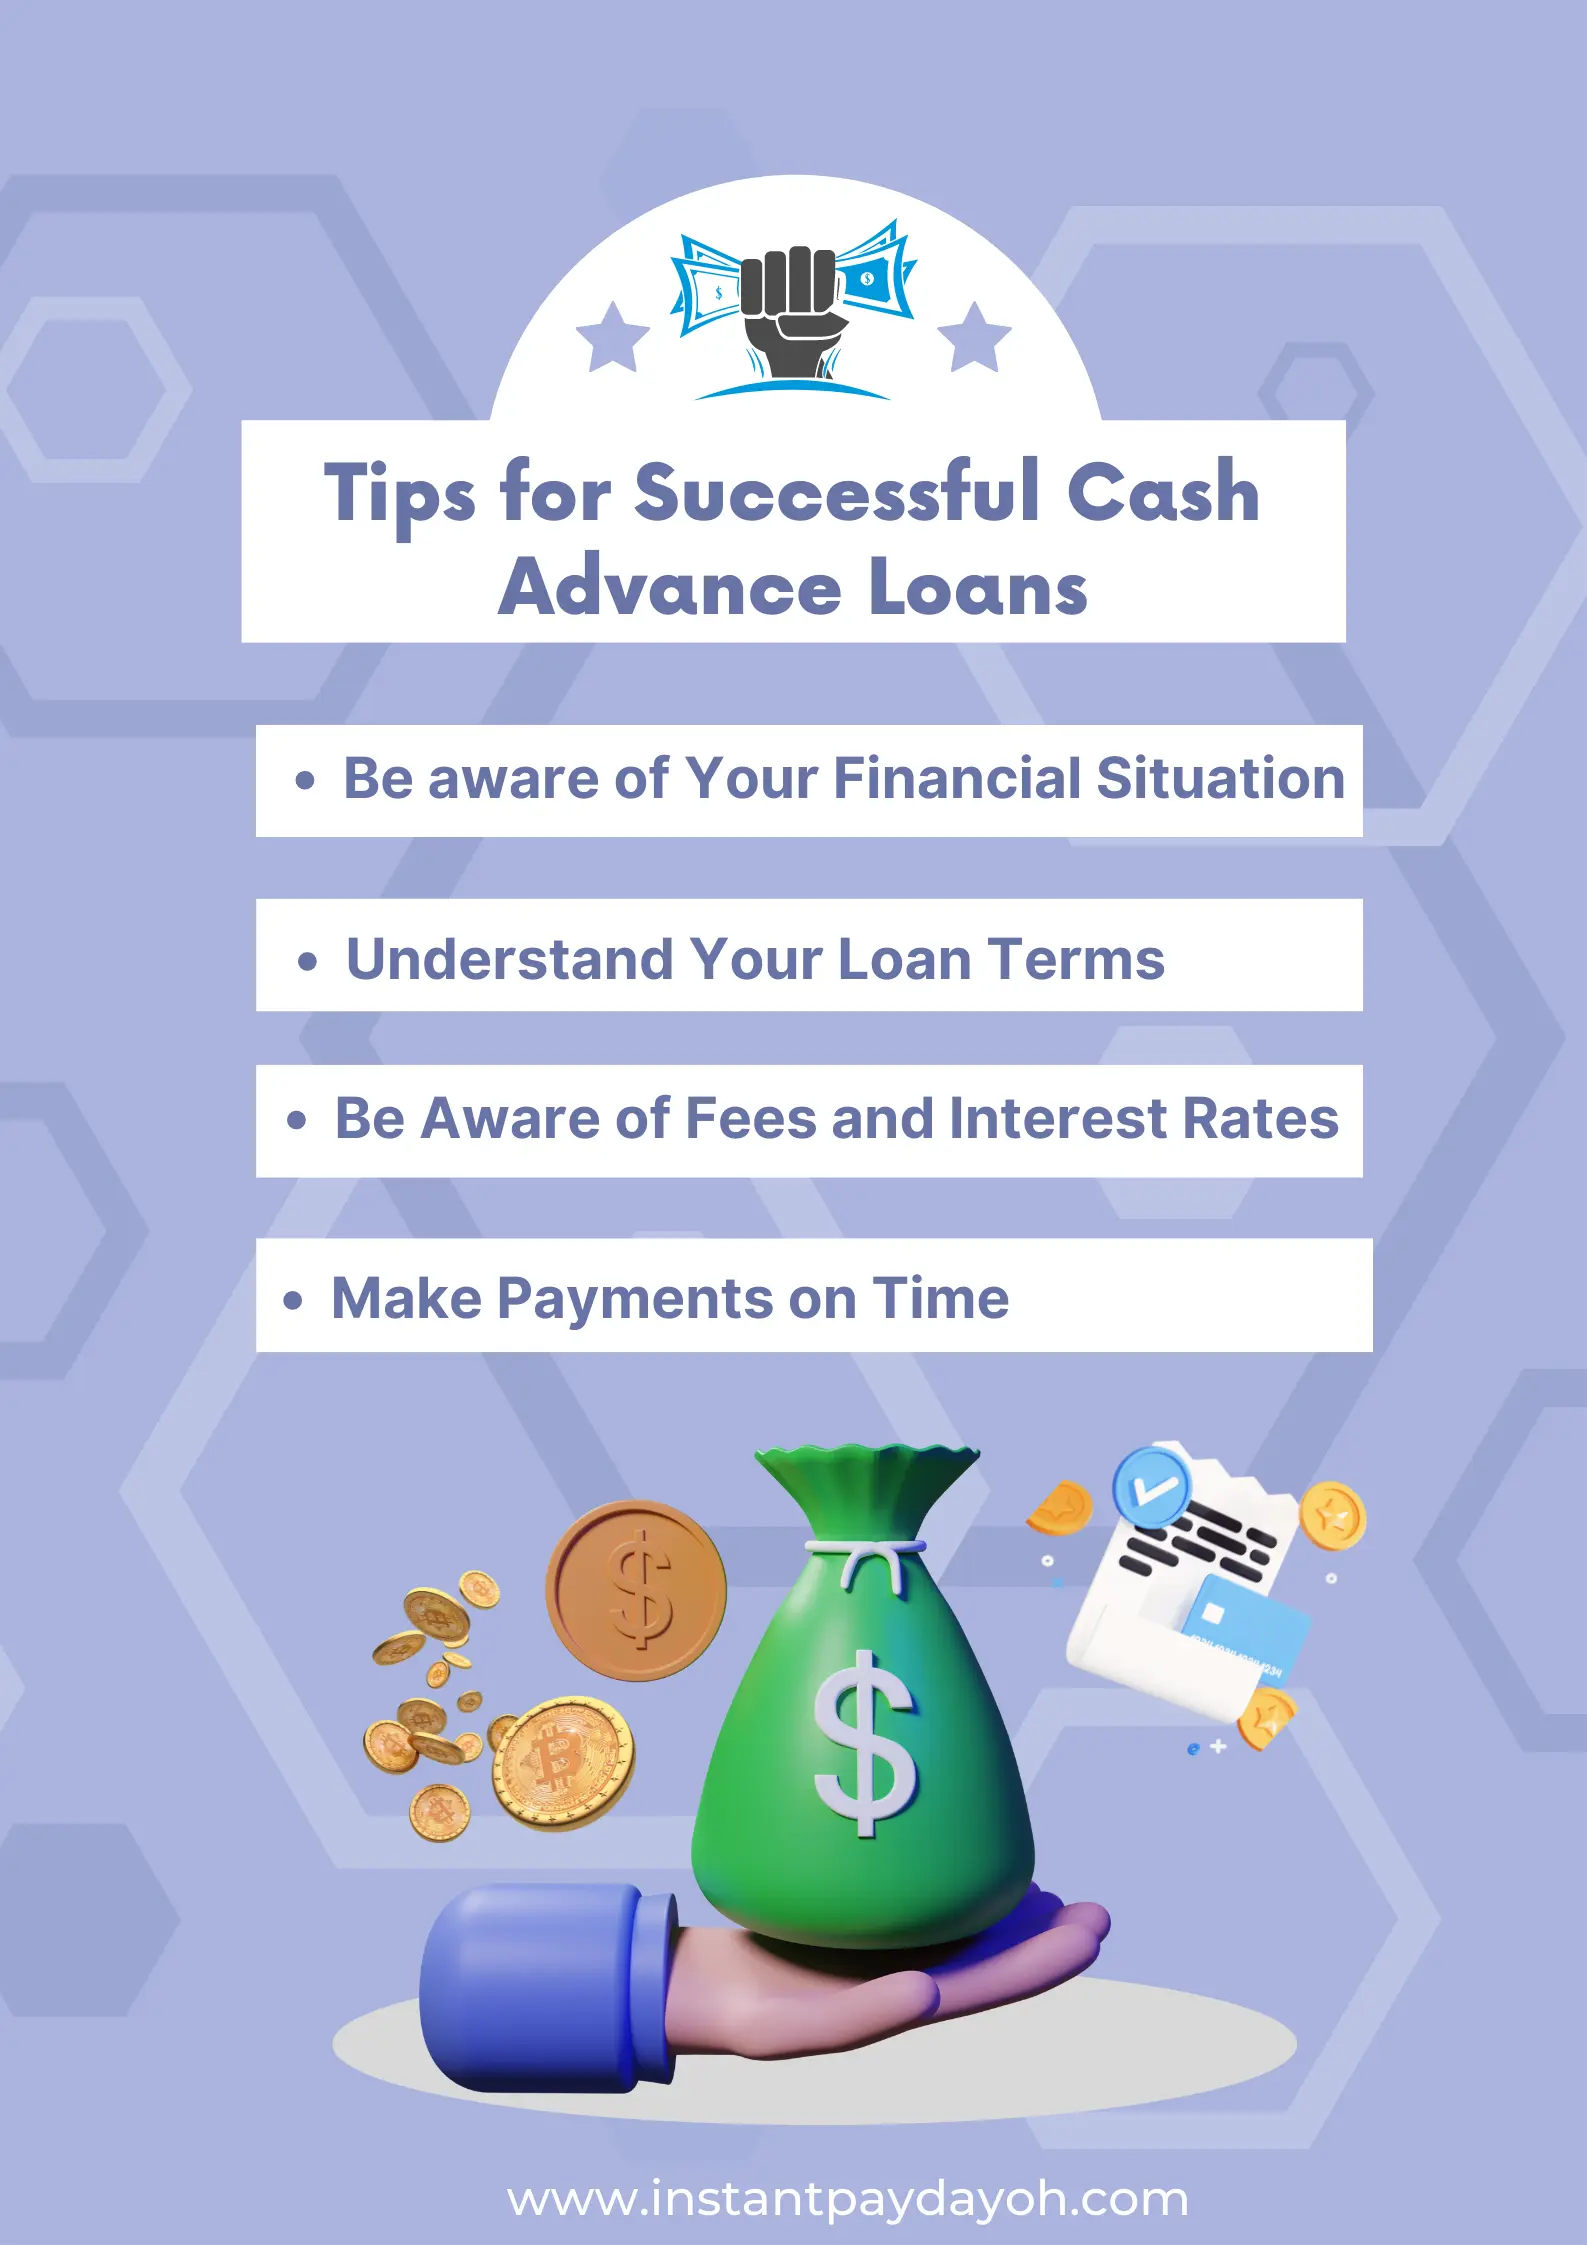 _4 Tips for Successful Cash Advance Loans